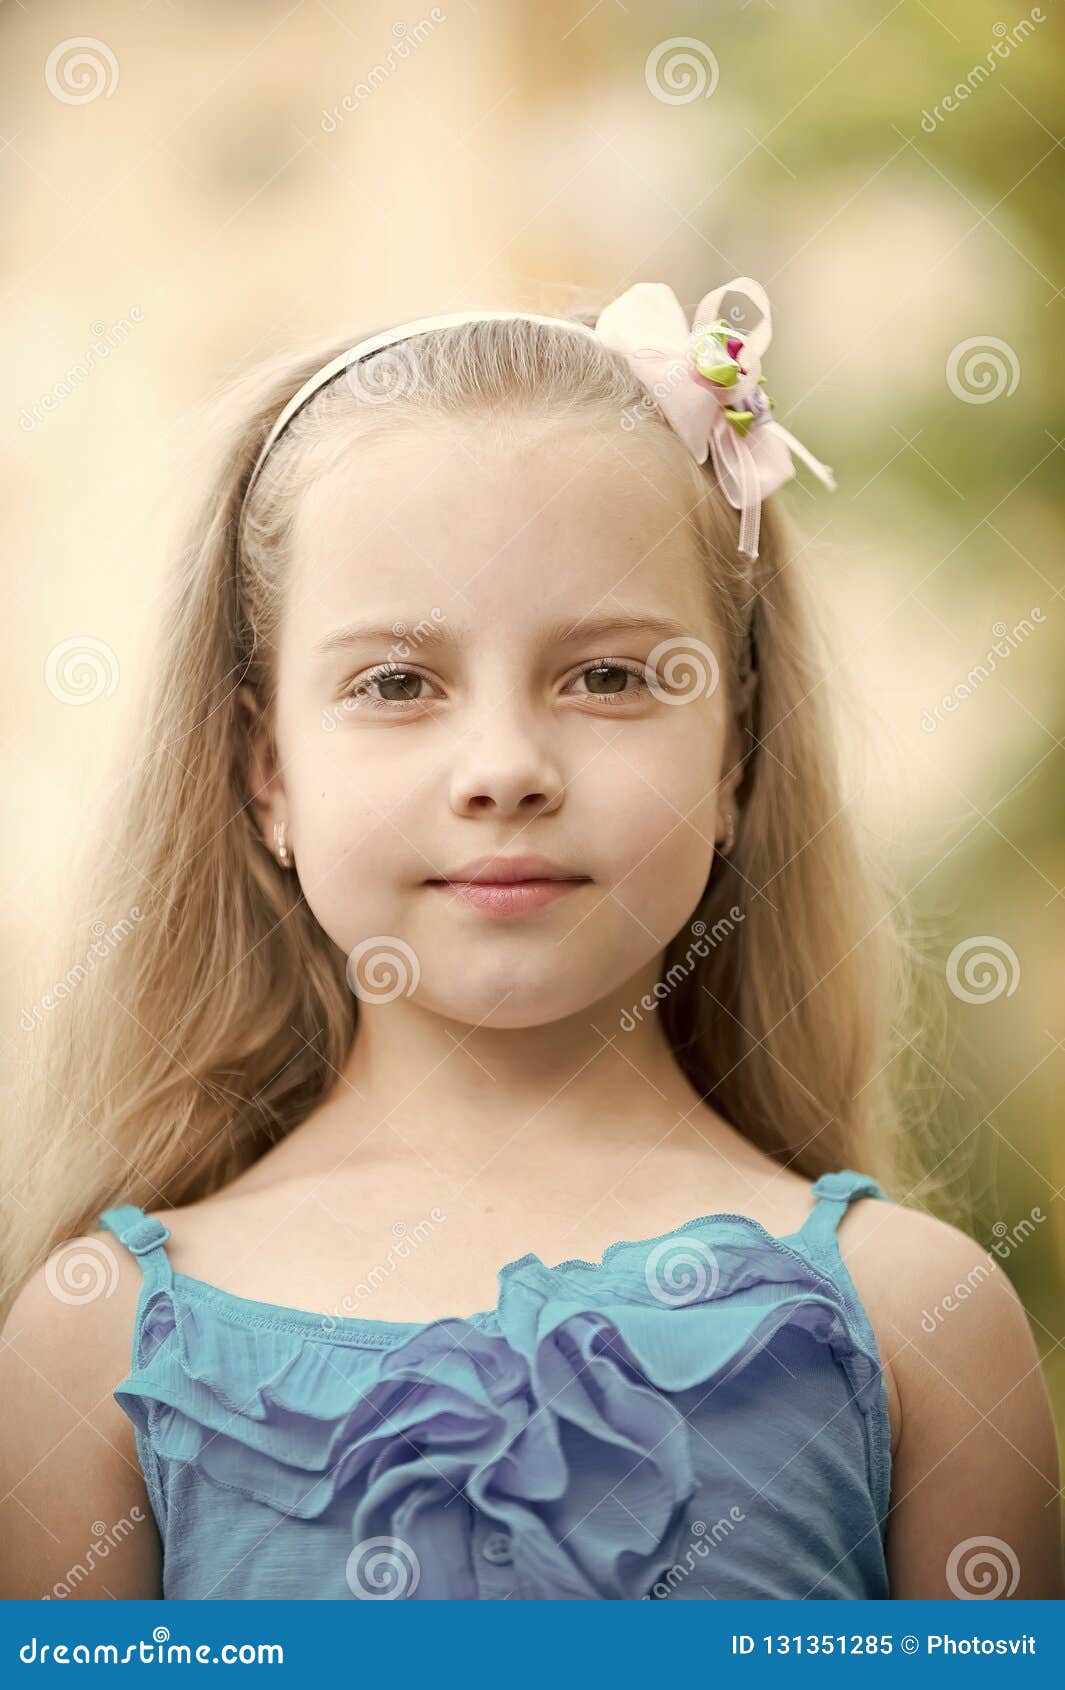 Download Small Baby Girl With Smiling Face In Blue Vest Outdoor ...